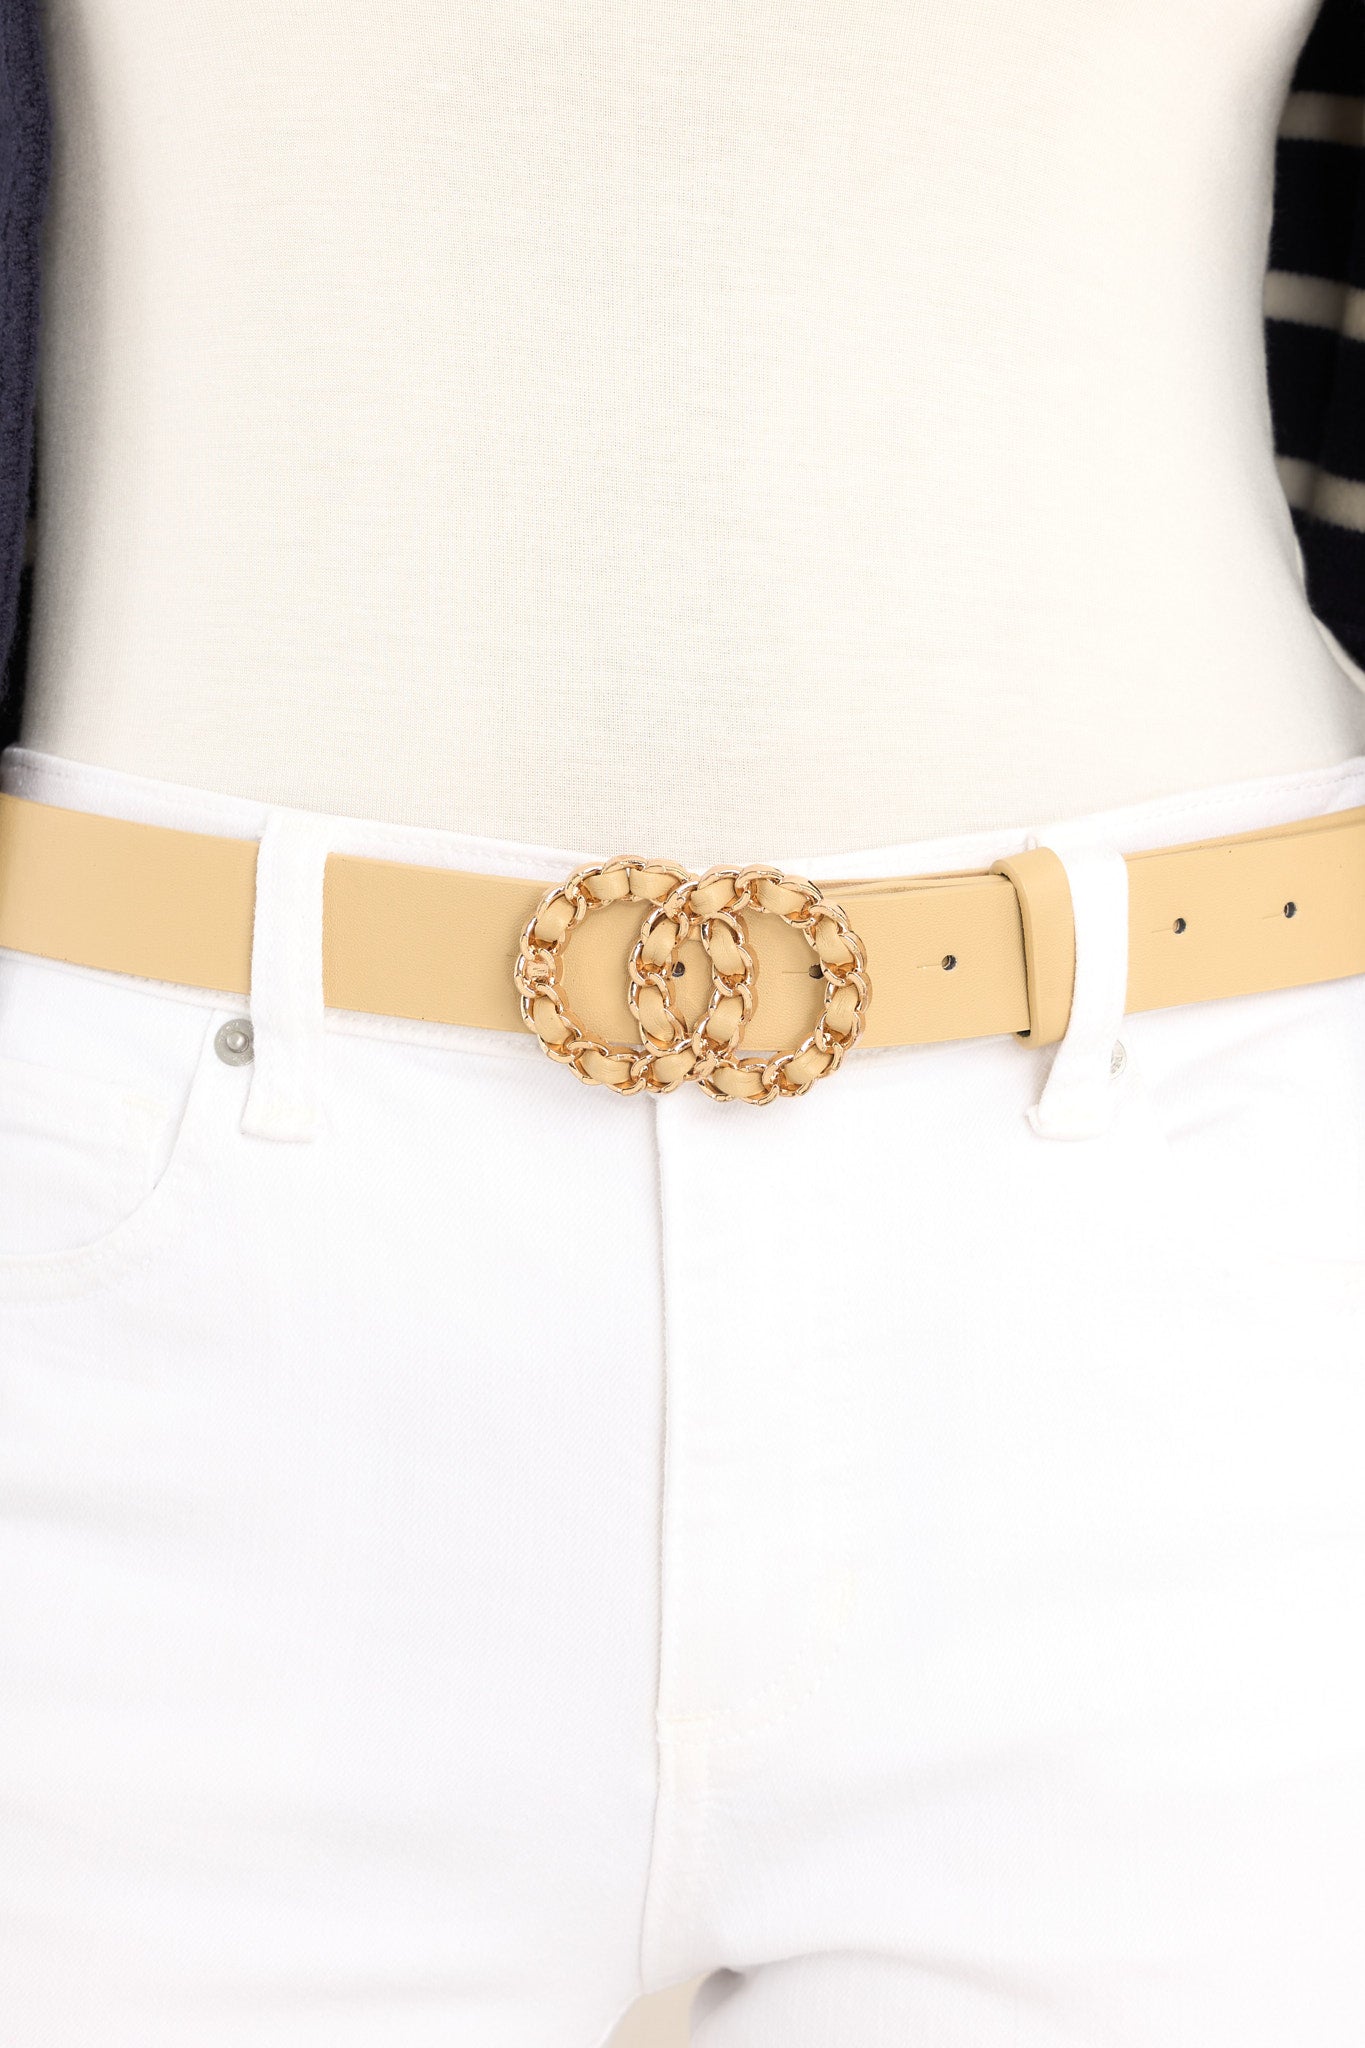 This beige belt features gold hardware, and a double hoop buckle closure.